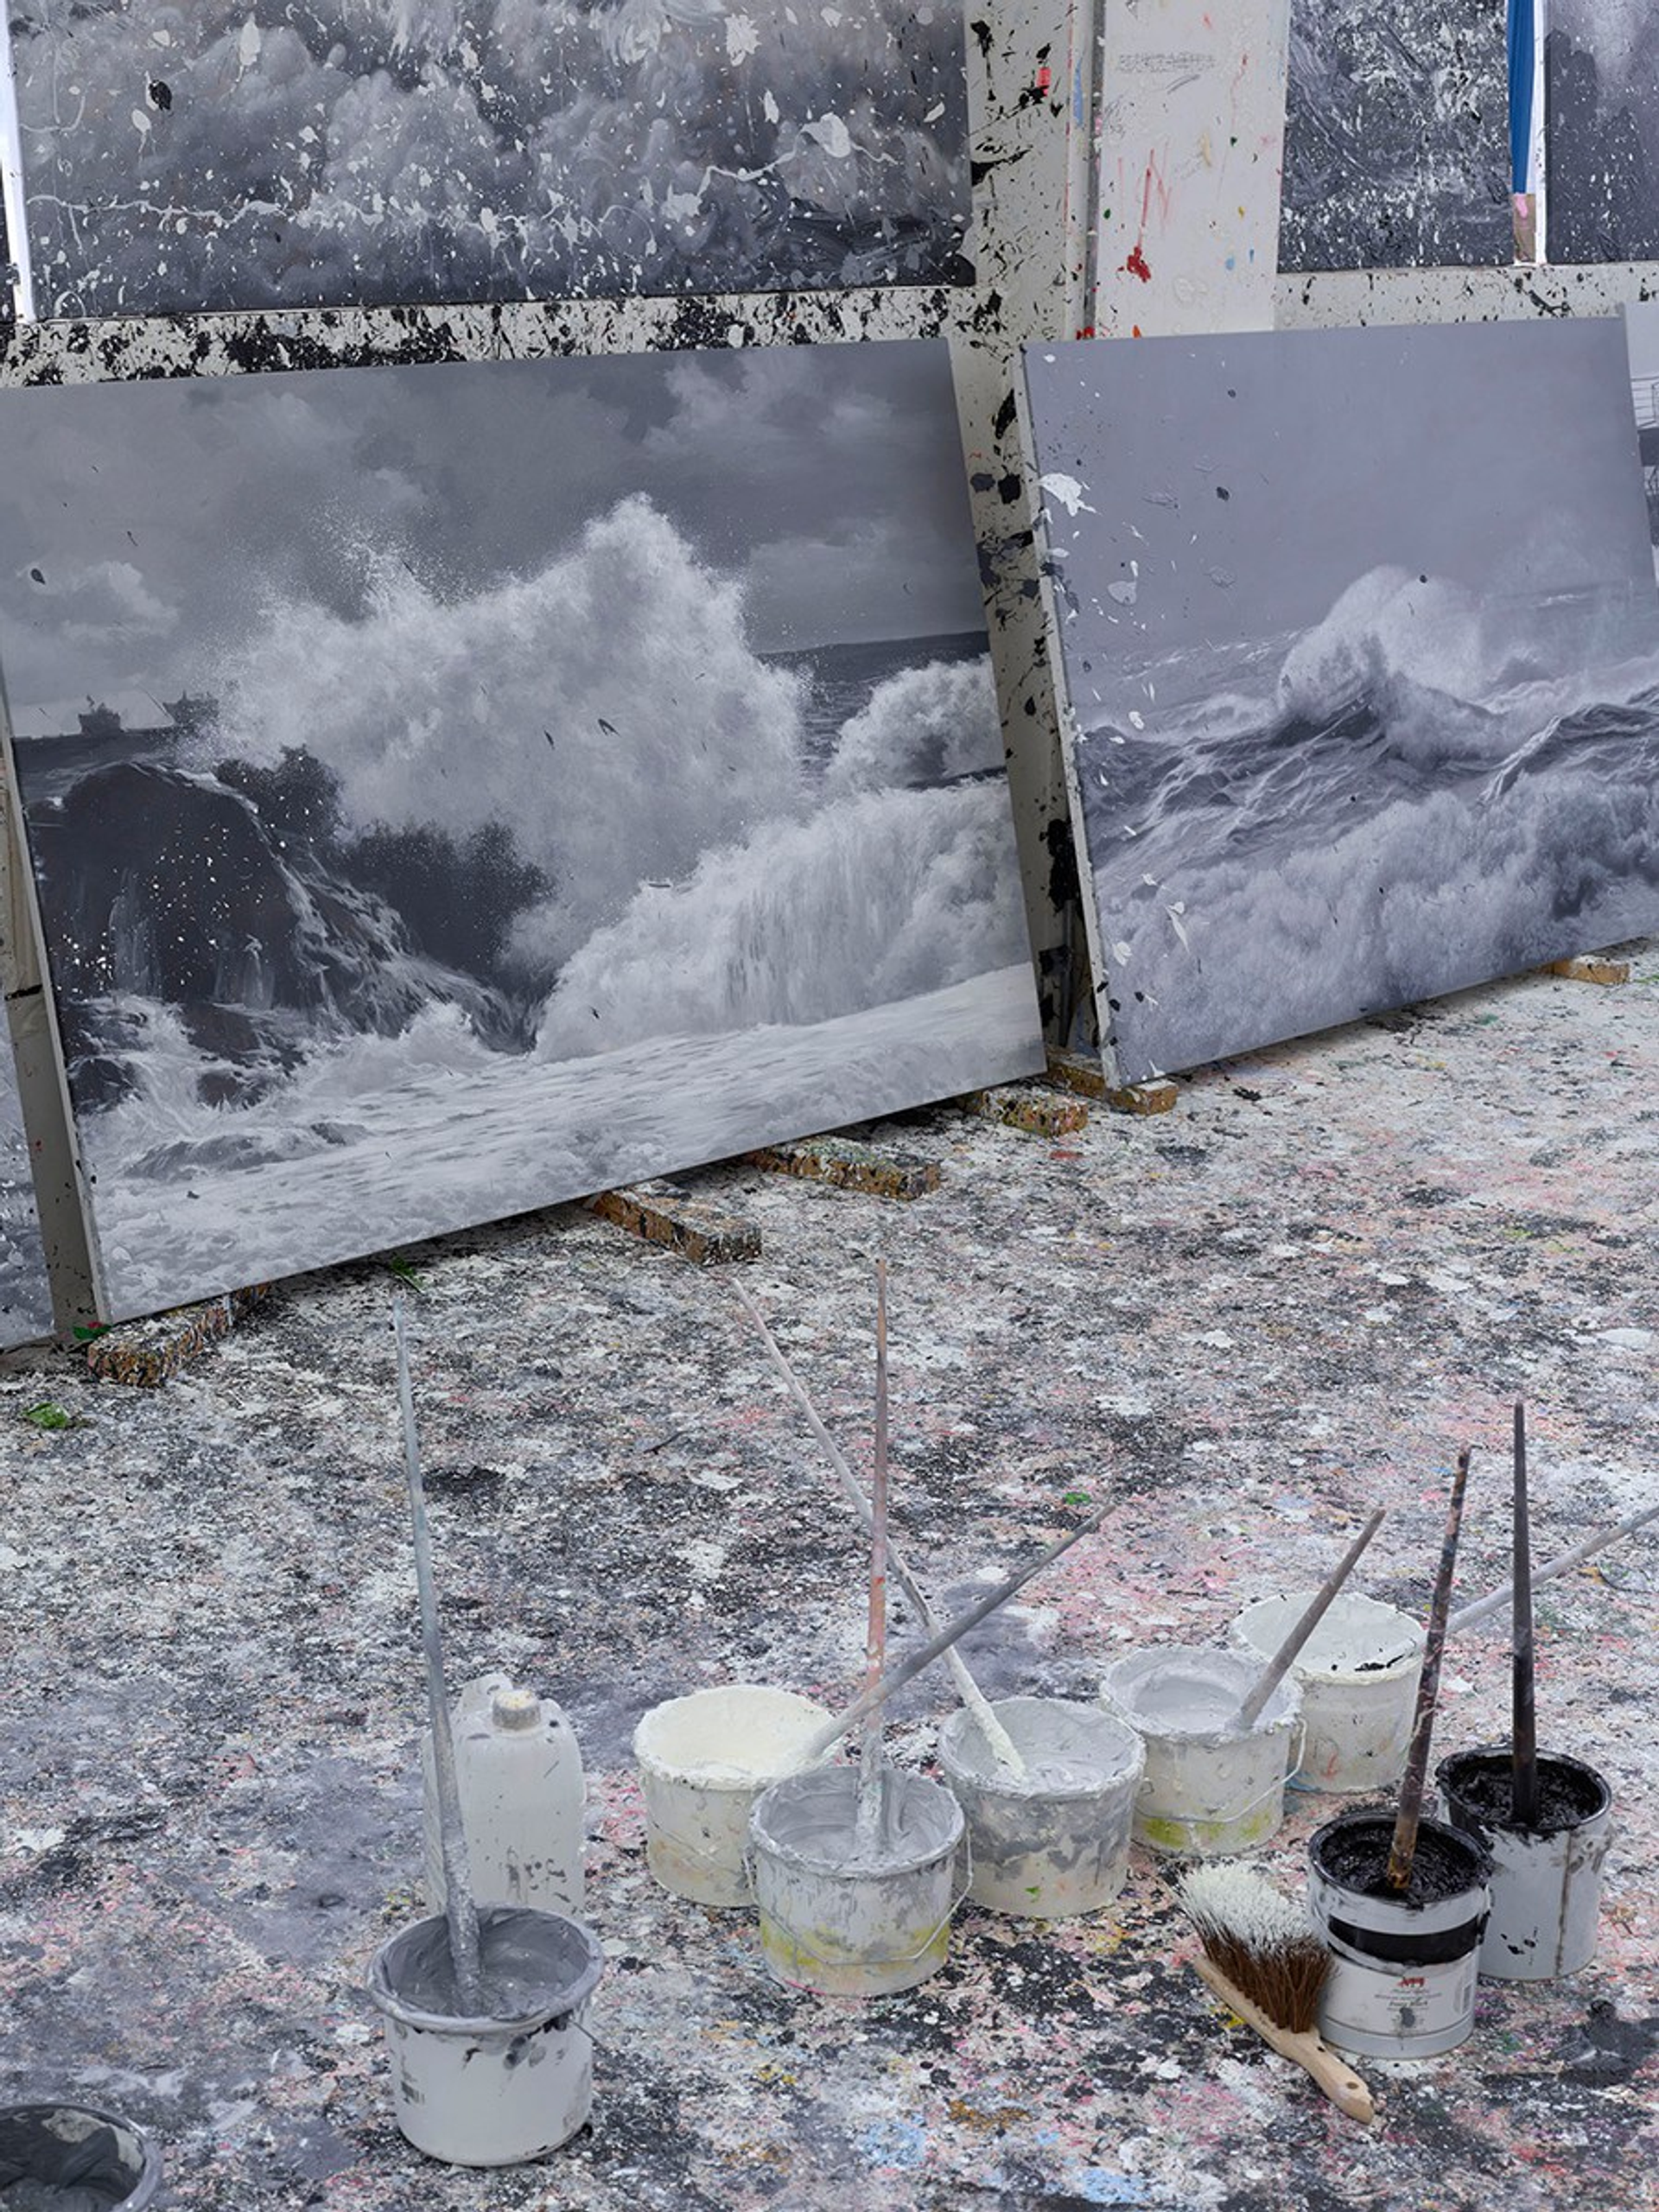 An image of some of Damien Hirst's seascapes on the floor of the artist's studio.